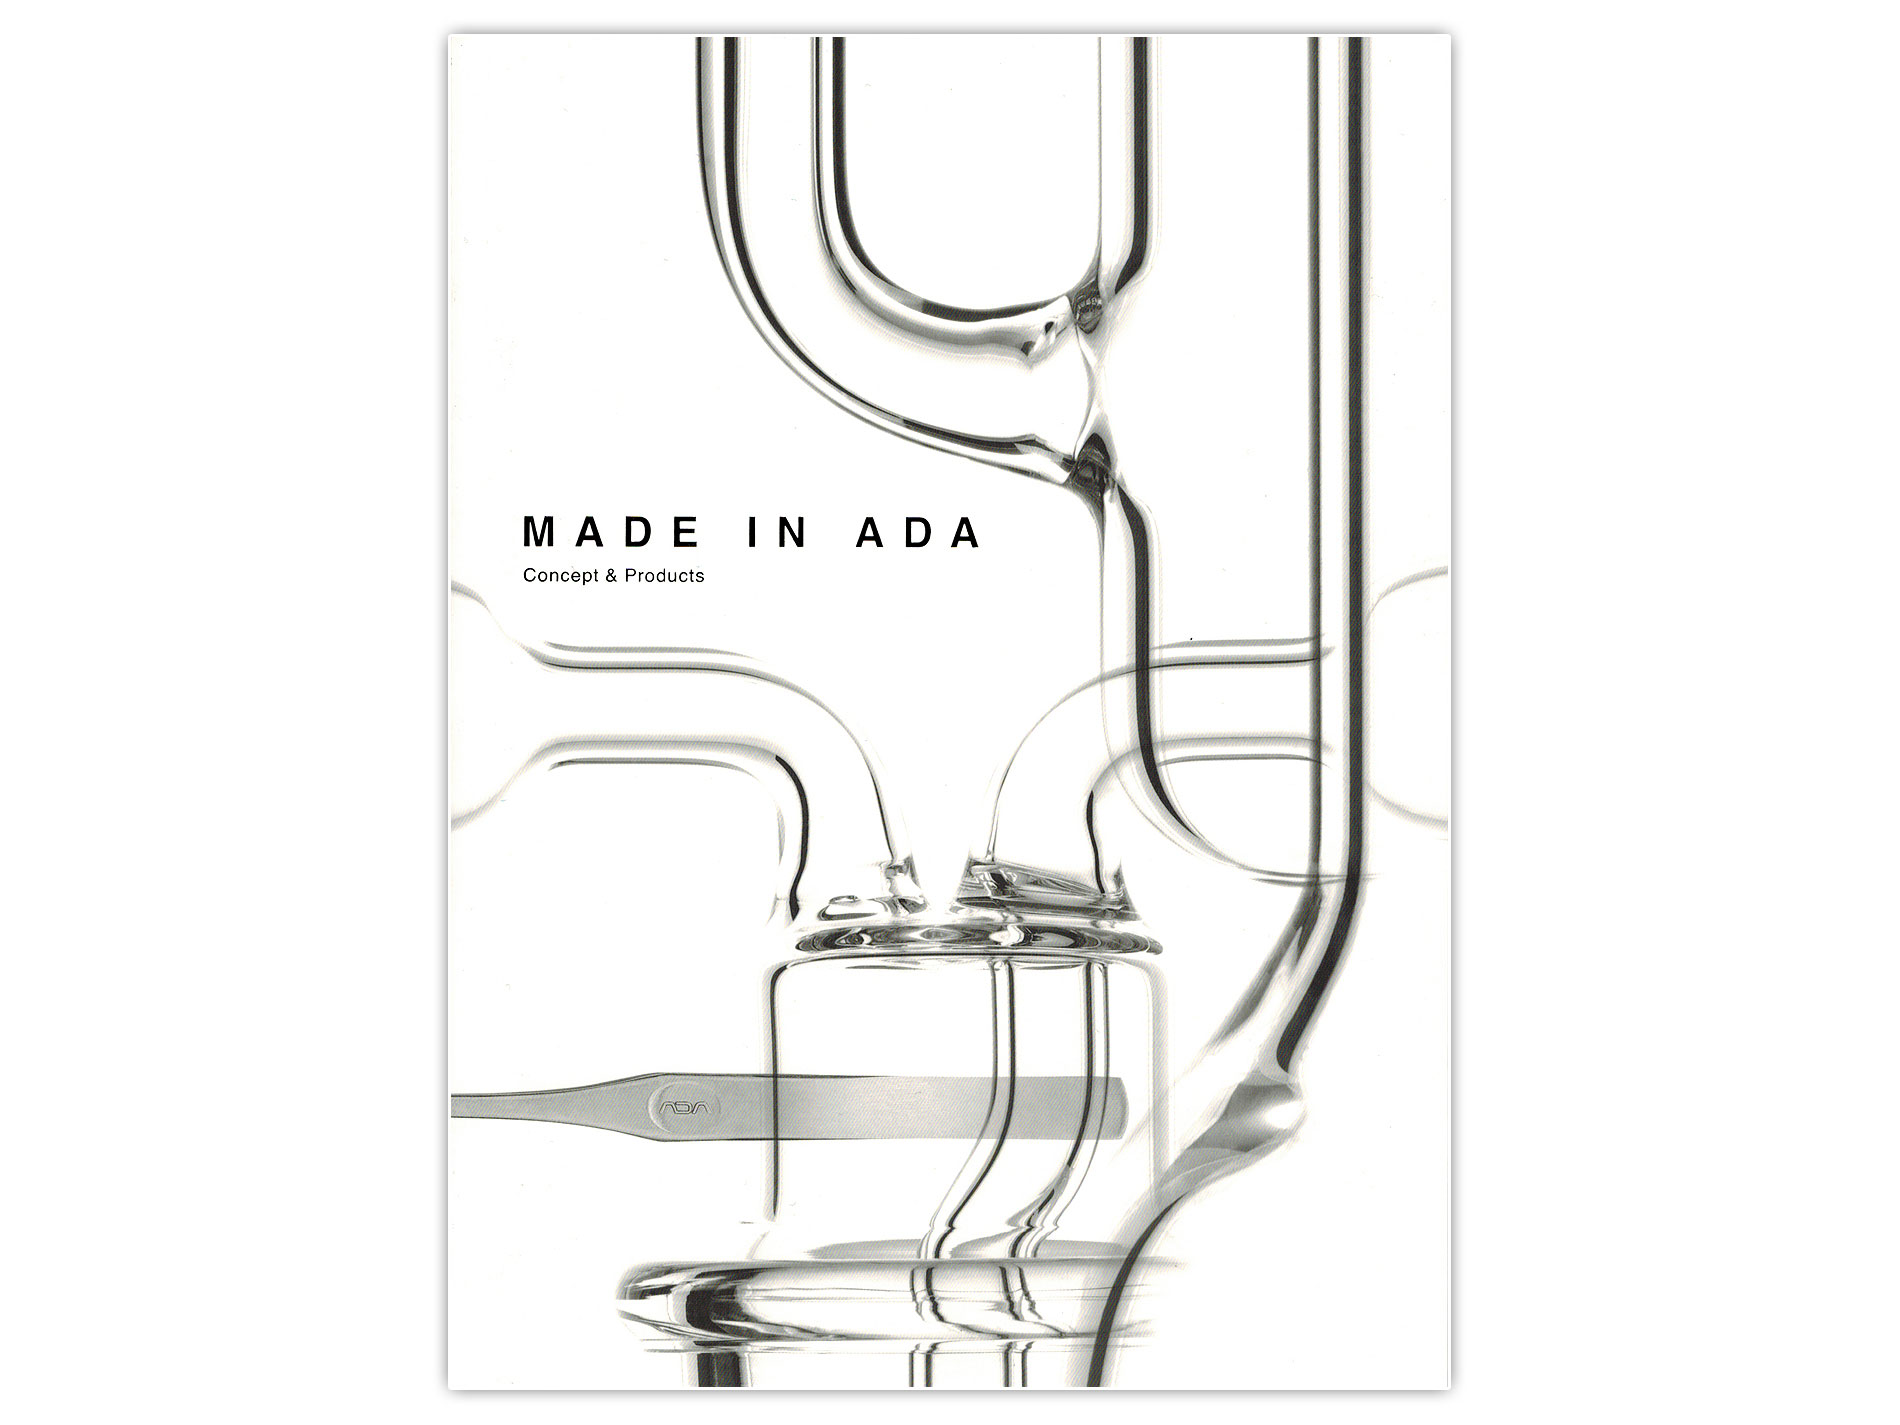 ADA - Made in ADA - Concept & Products (Product Book) | GARNELENHAUS